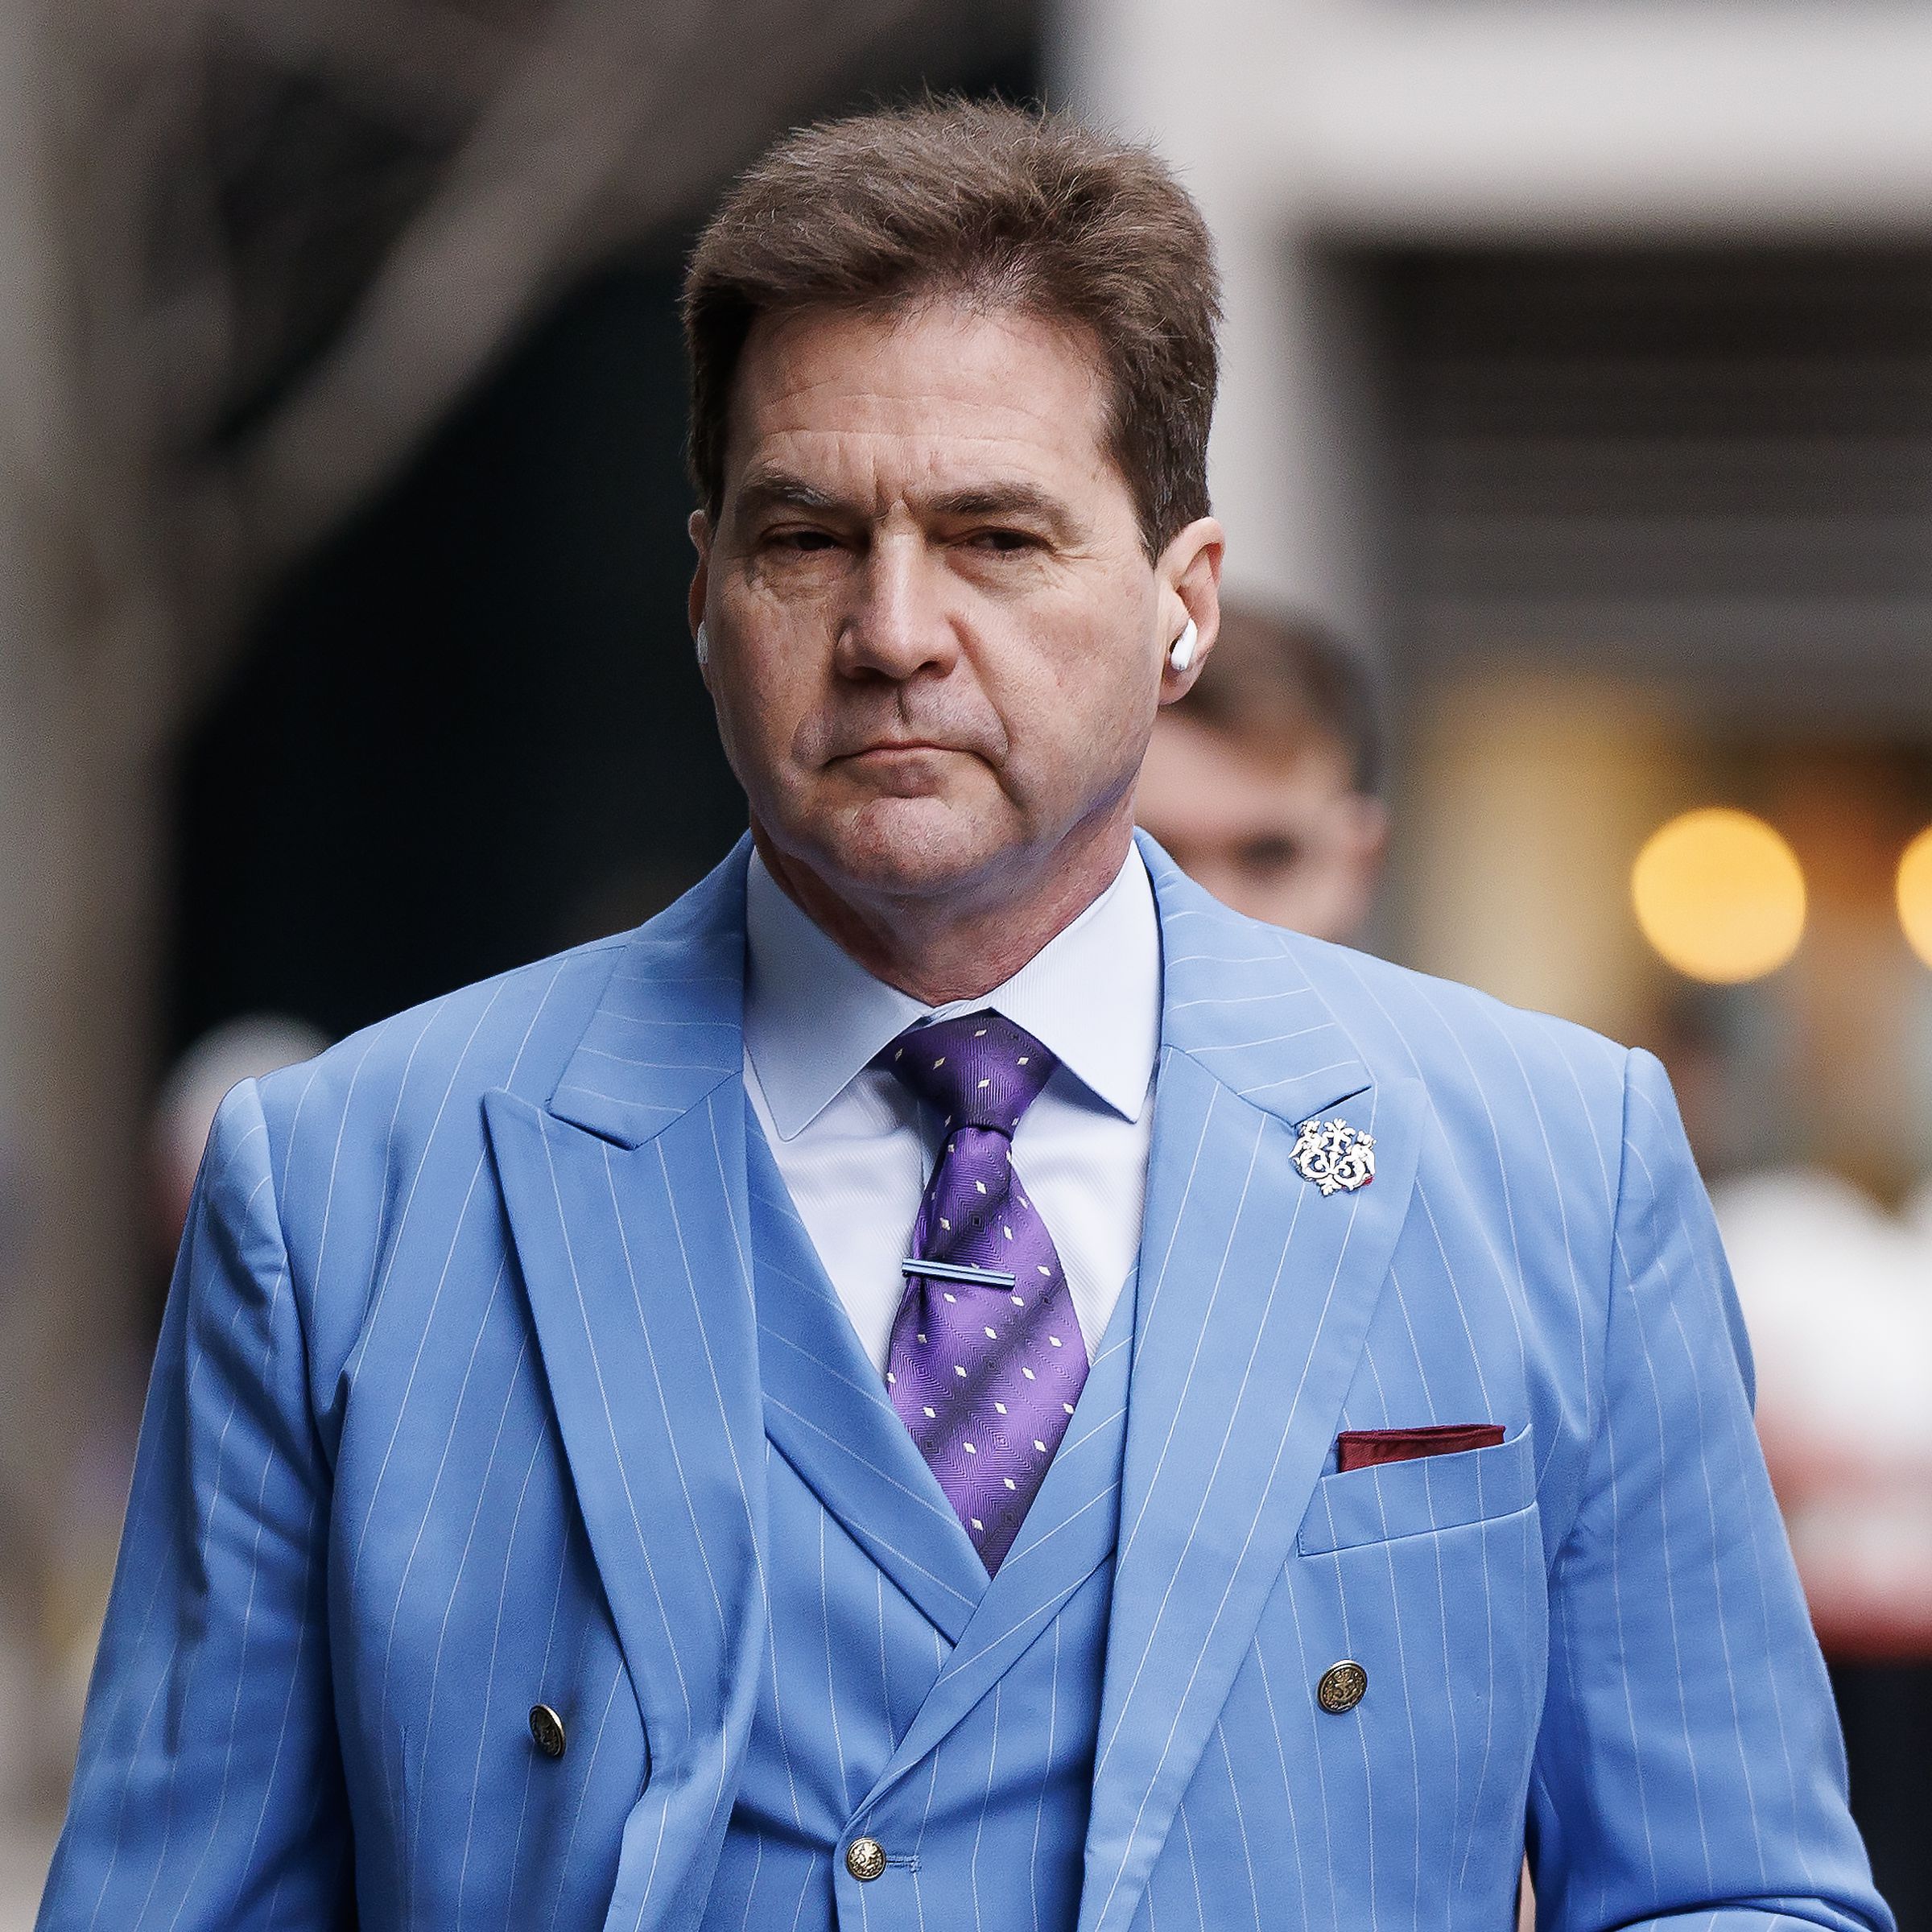 Judge Mellor ruled that Craig Wright (pictured) lied “extensively and repeatedly” about being Satoshi Nakamoto.